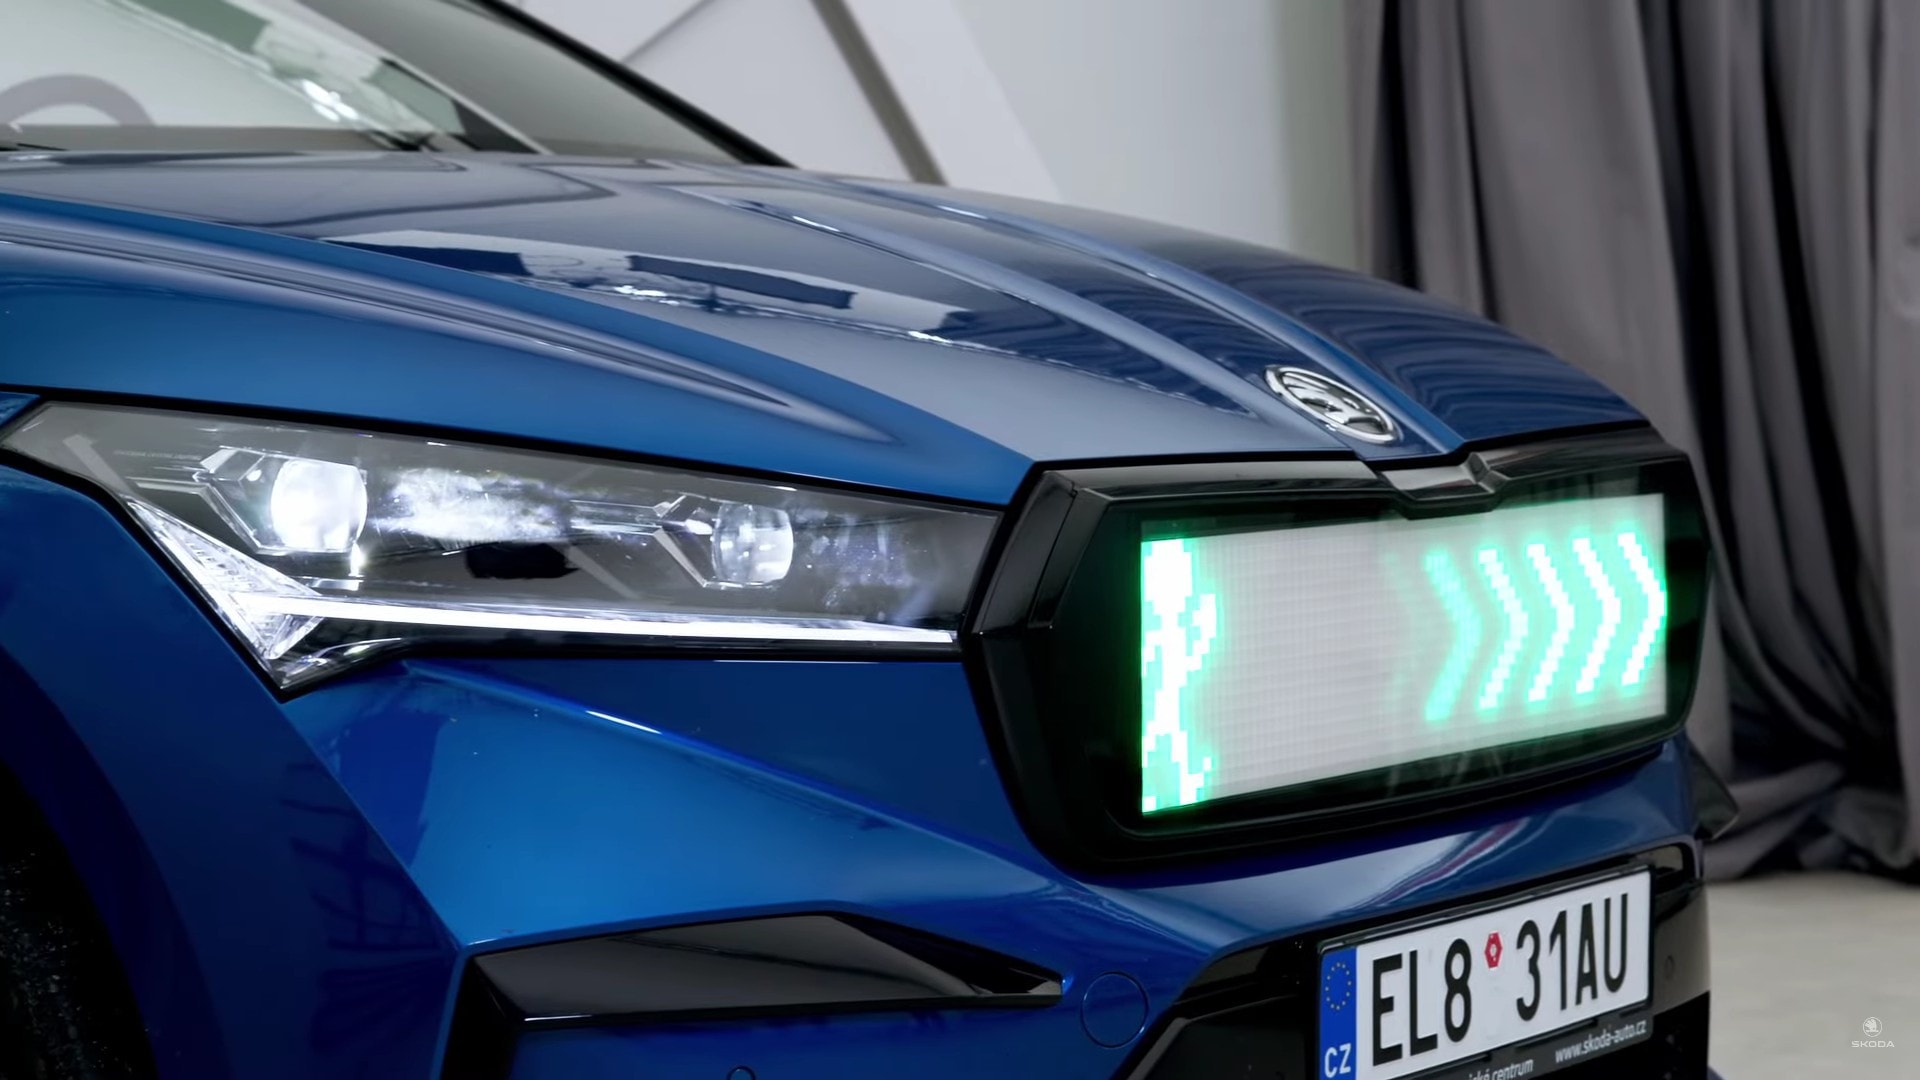 https://s1.cdn.autoevolution.com/images/news/skoda-tests-grille-mounted-traffic-lights-on-autonomous-cars-it-s-not-as-wild-as-it-seems-213361_1.jpg